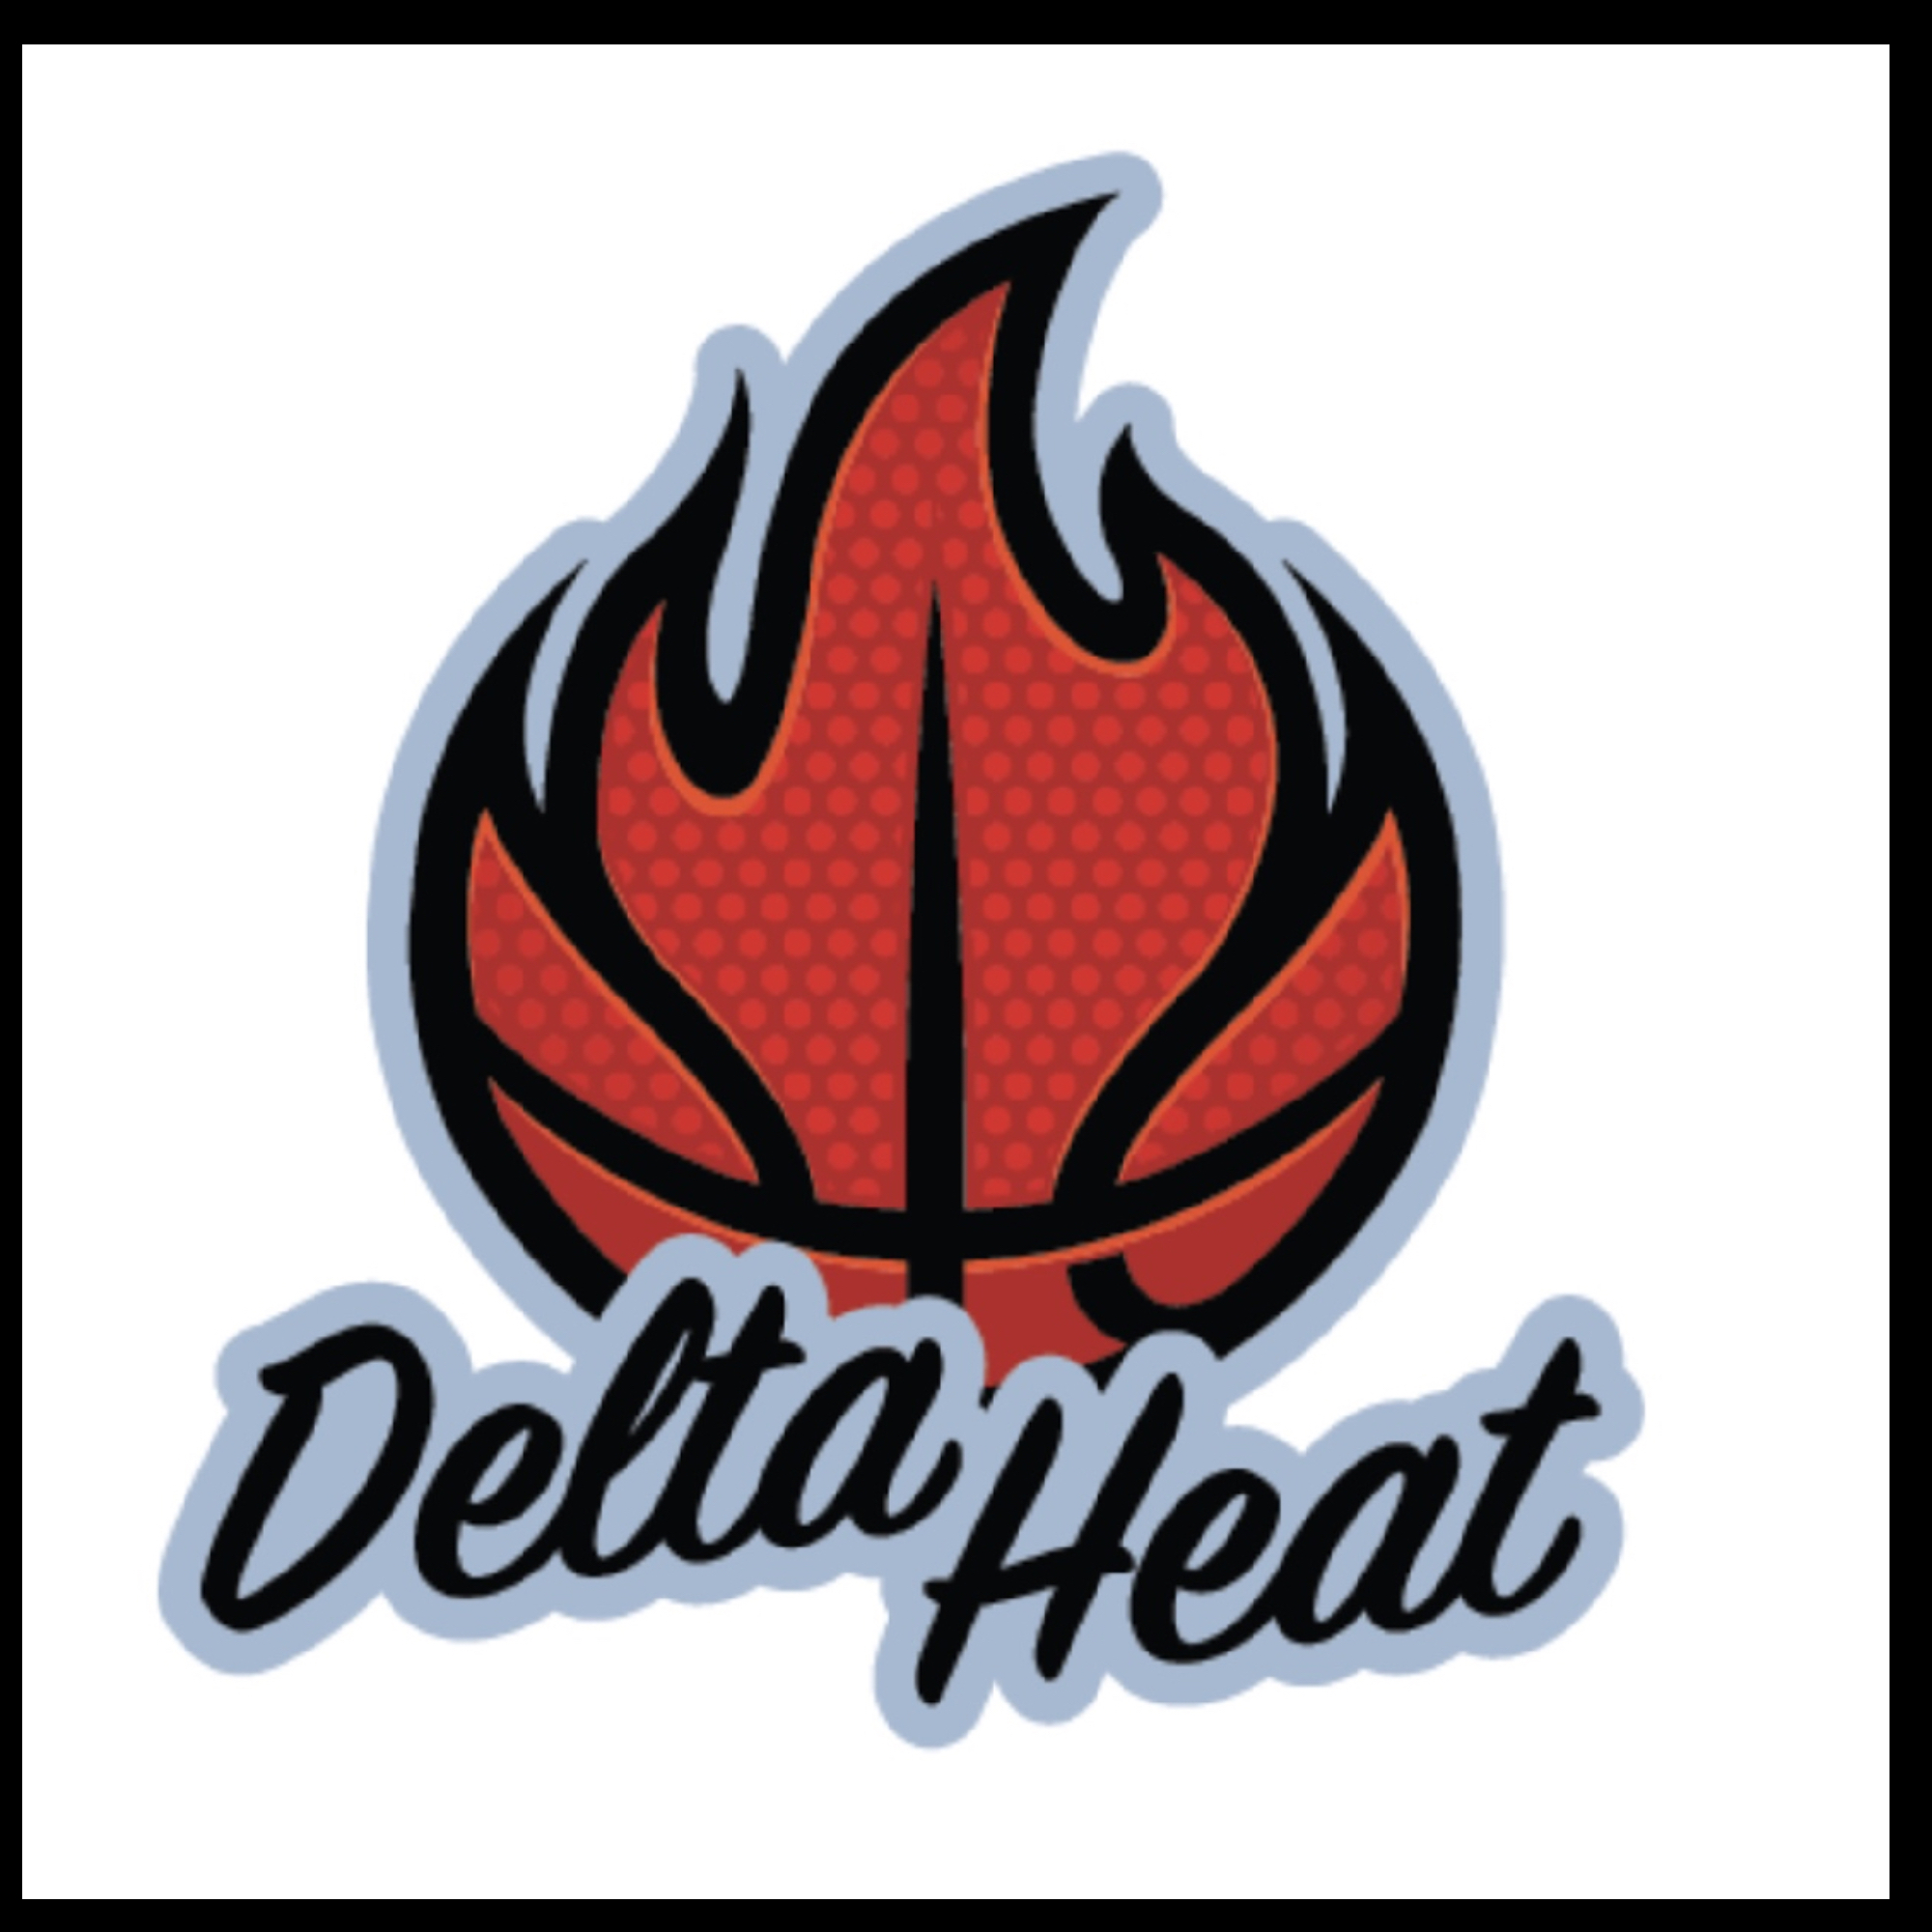 The official logo of Delta Heat